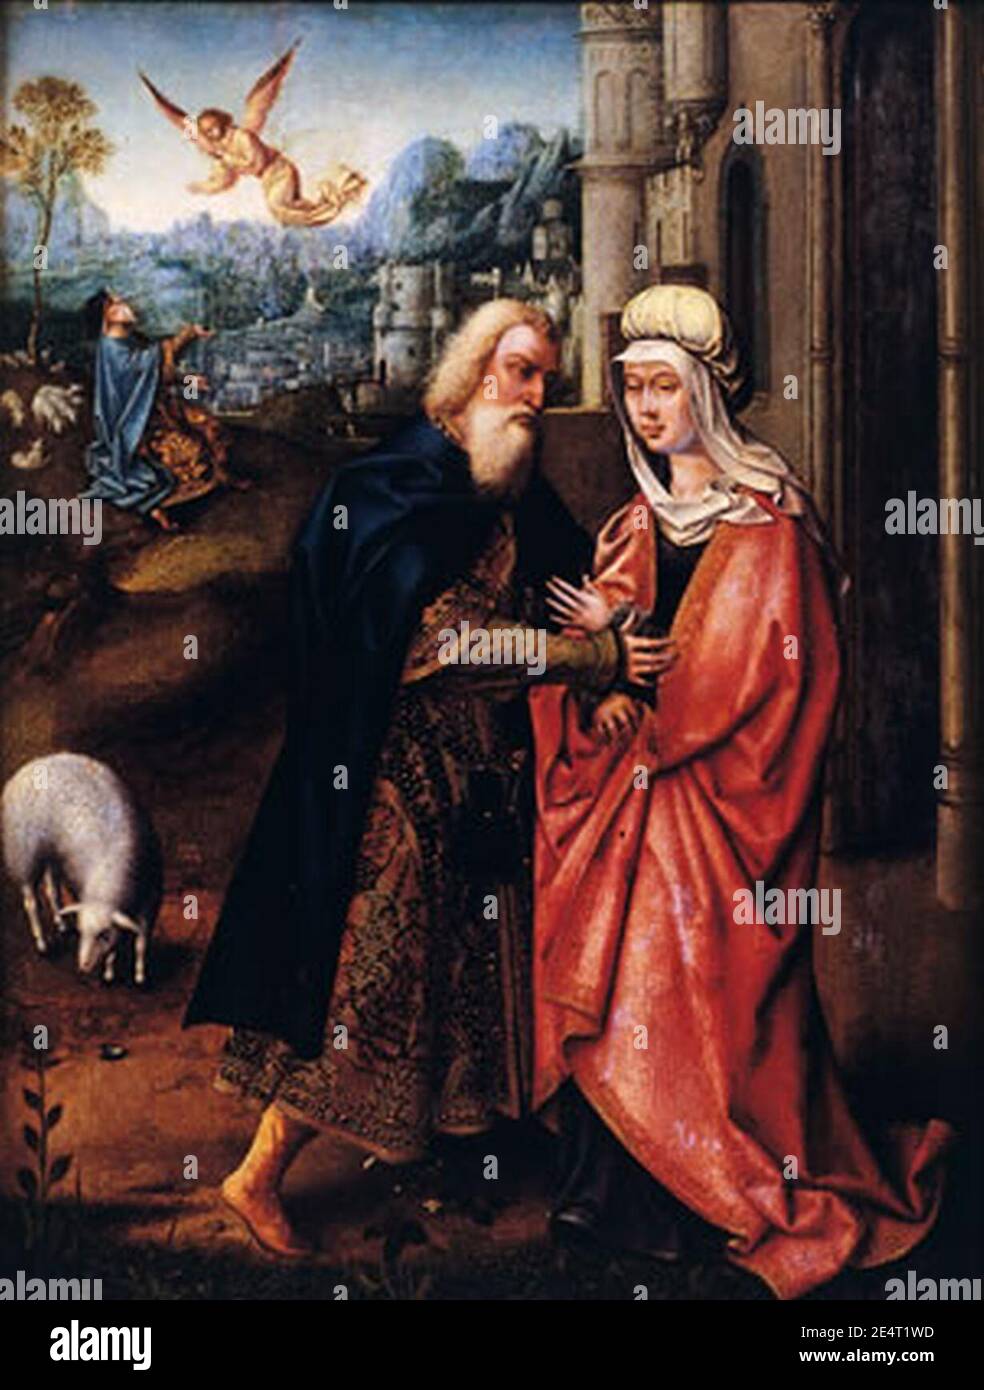 Master of the Adoration of Machico - Meeting at the Golden Gate. Stock Photo